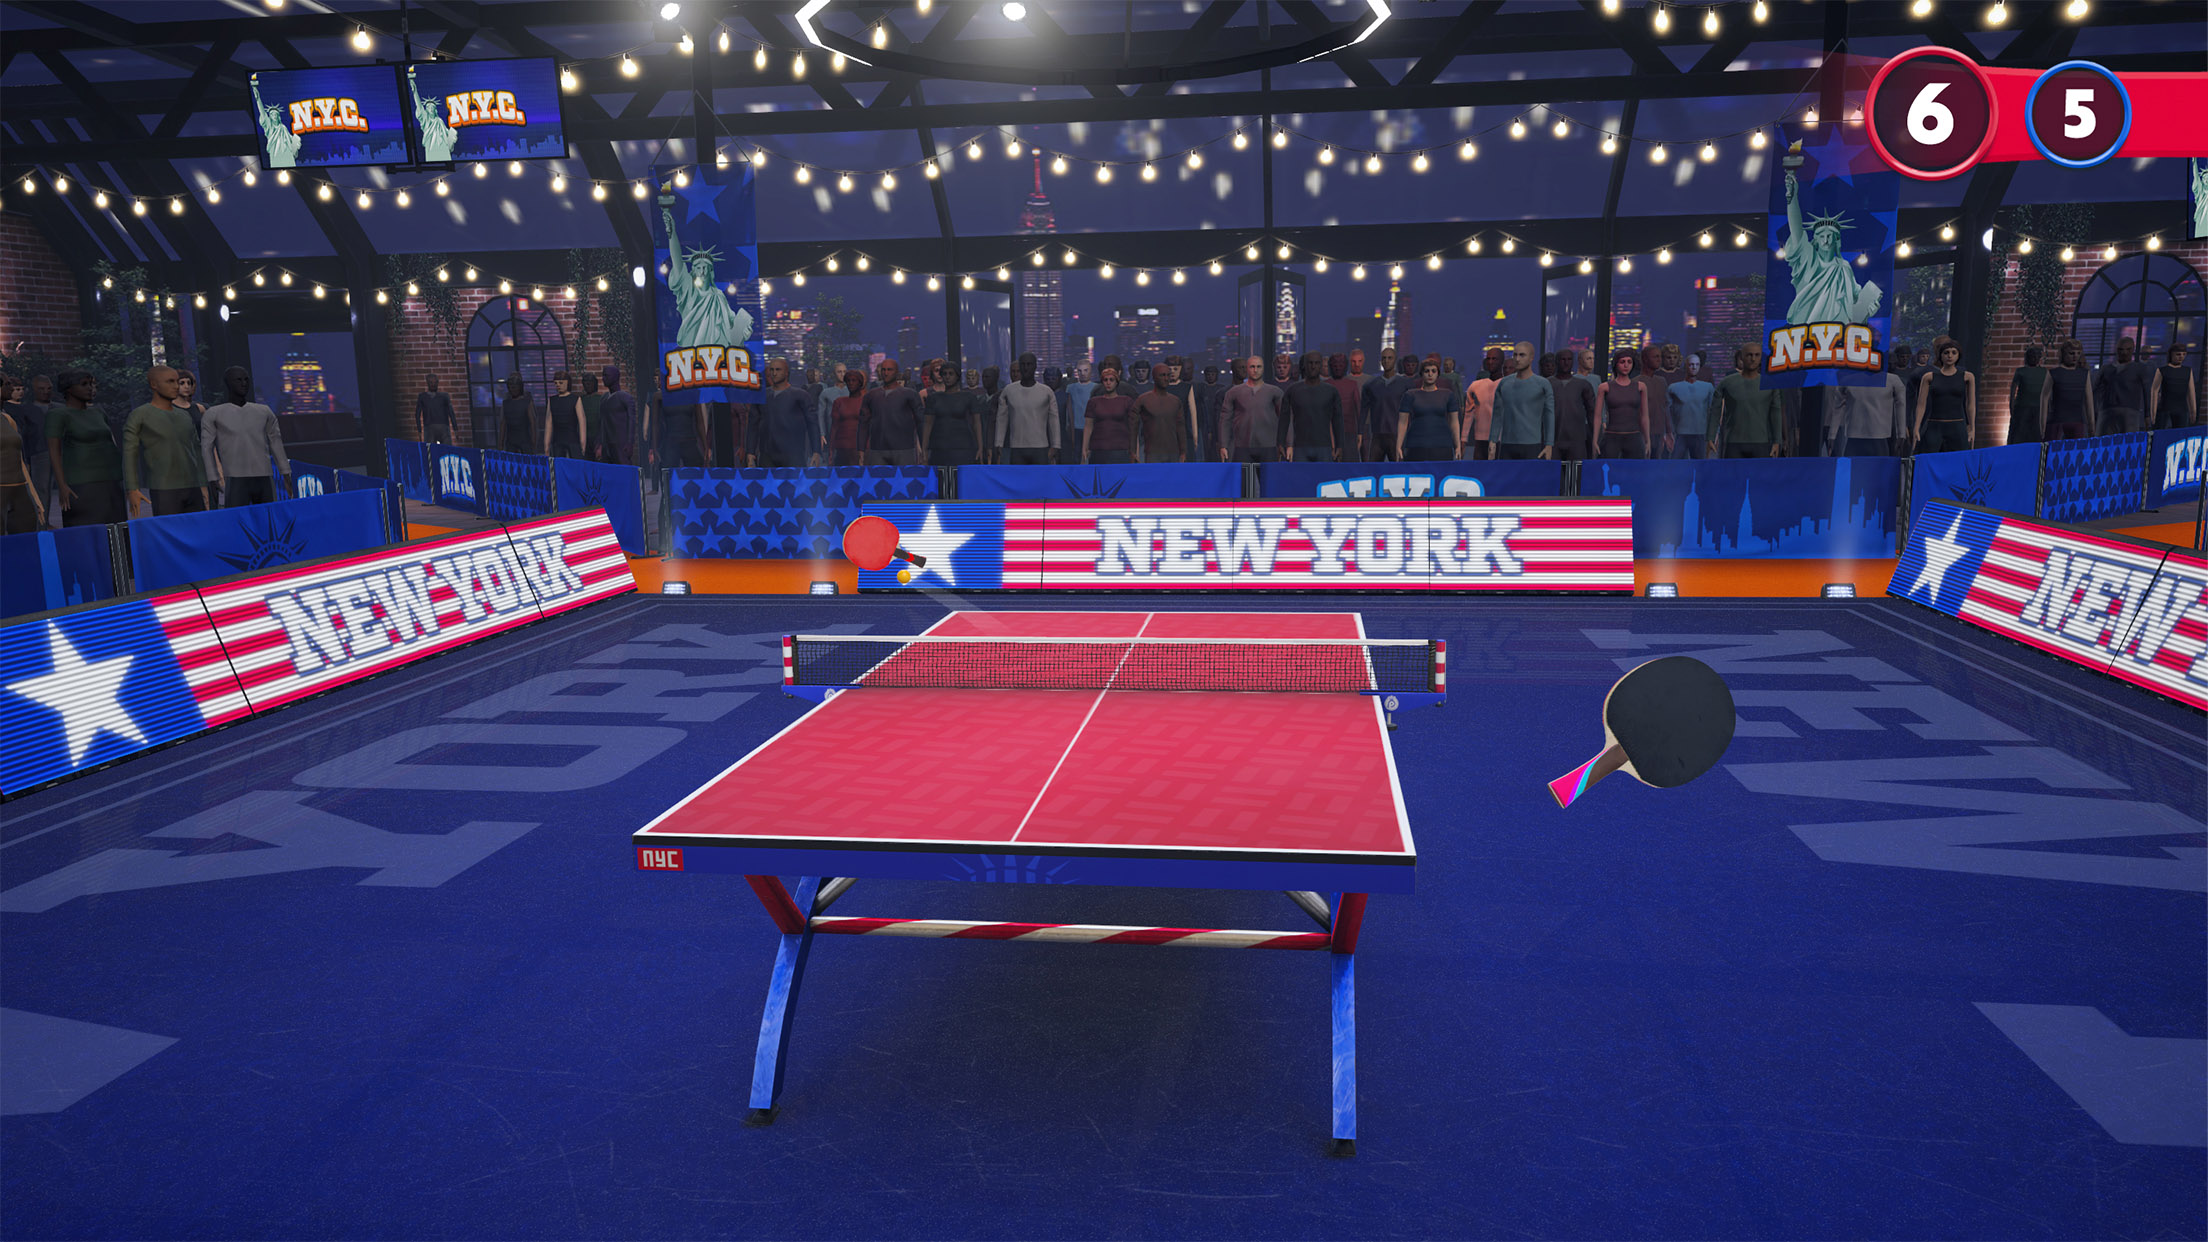 Ping Pong Fury, Skip the paddles! Ping Pong Fury delivers an unmatched table  tennis experience with intuitive controls and intense real-time multiplayer  action. 🏓 Start, By App Store